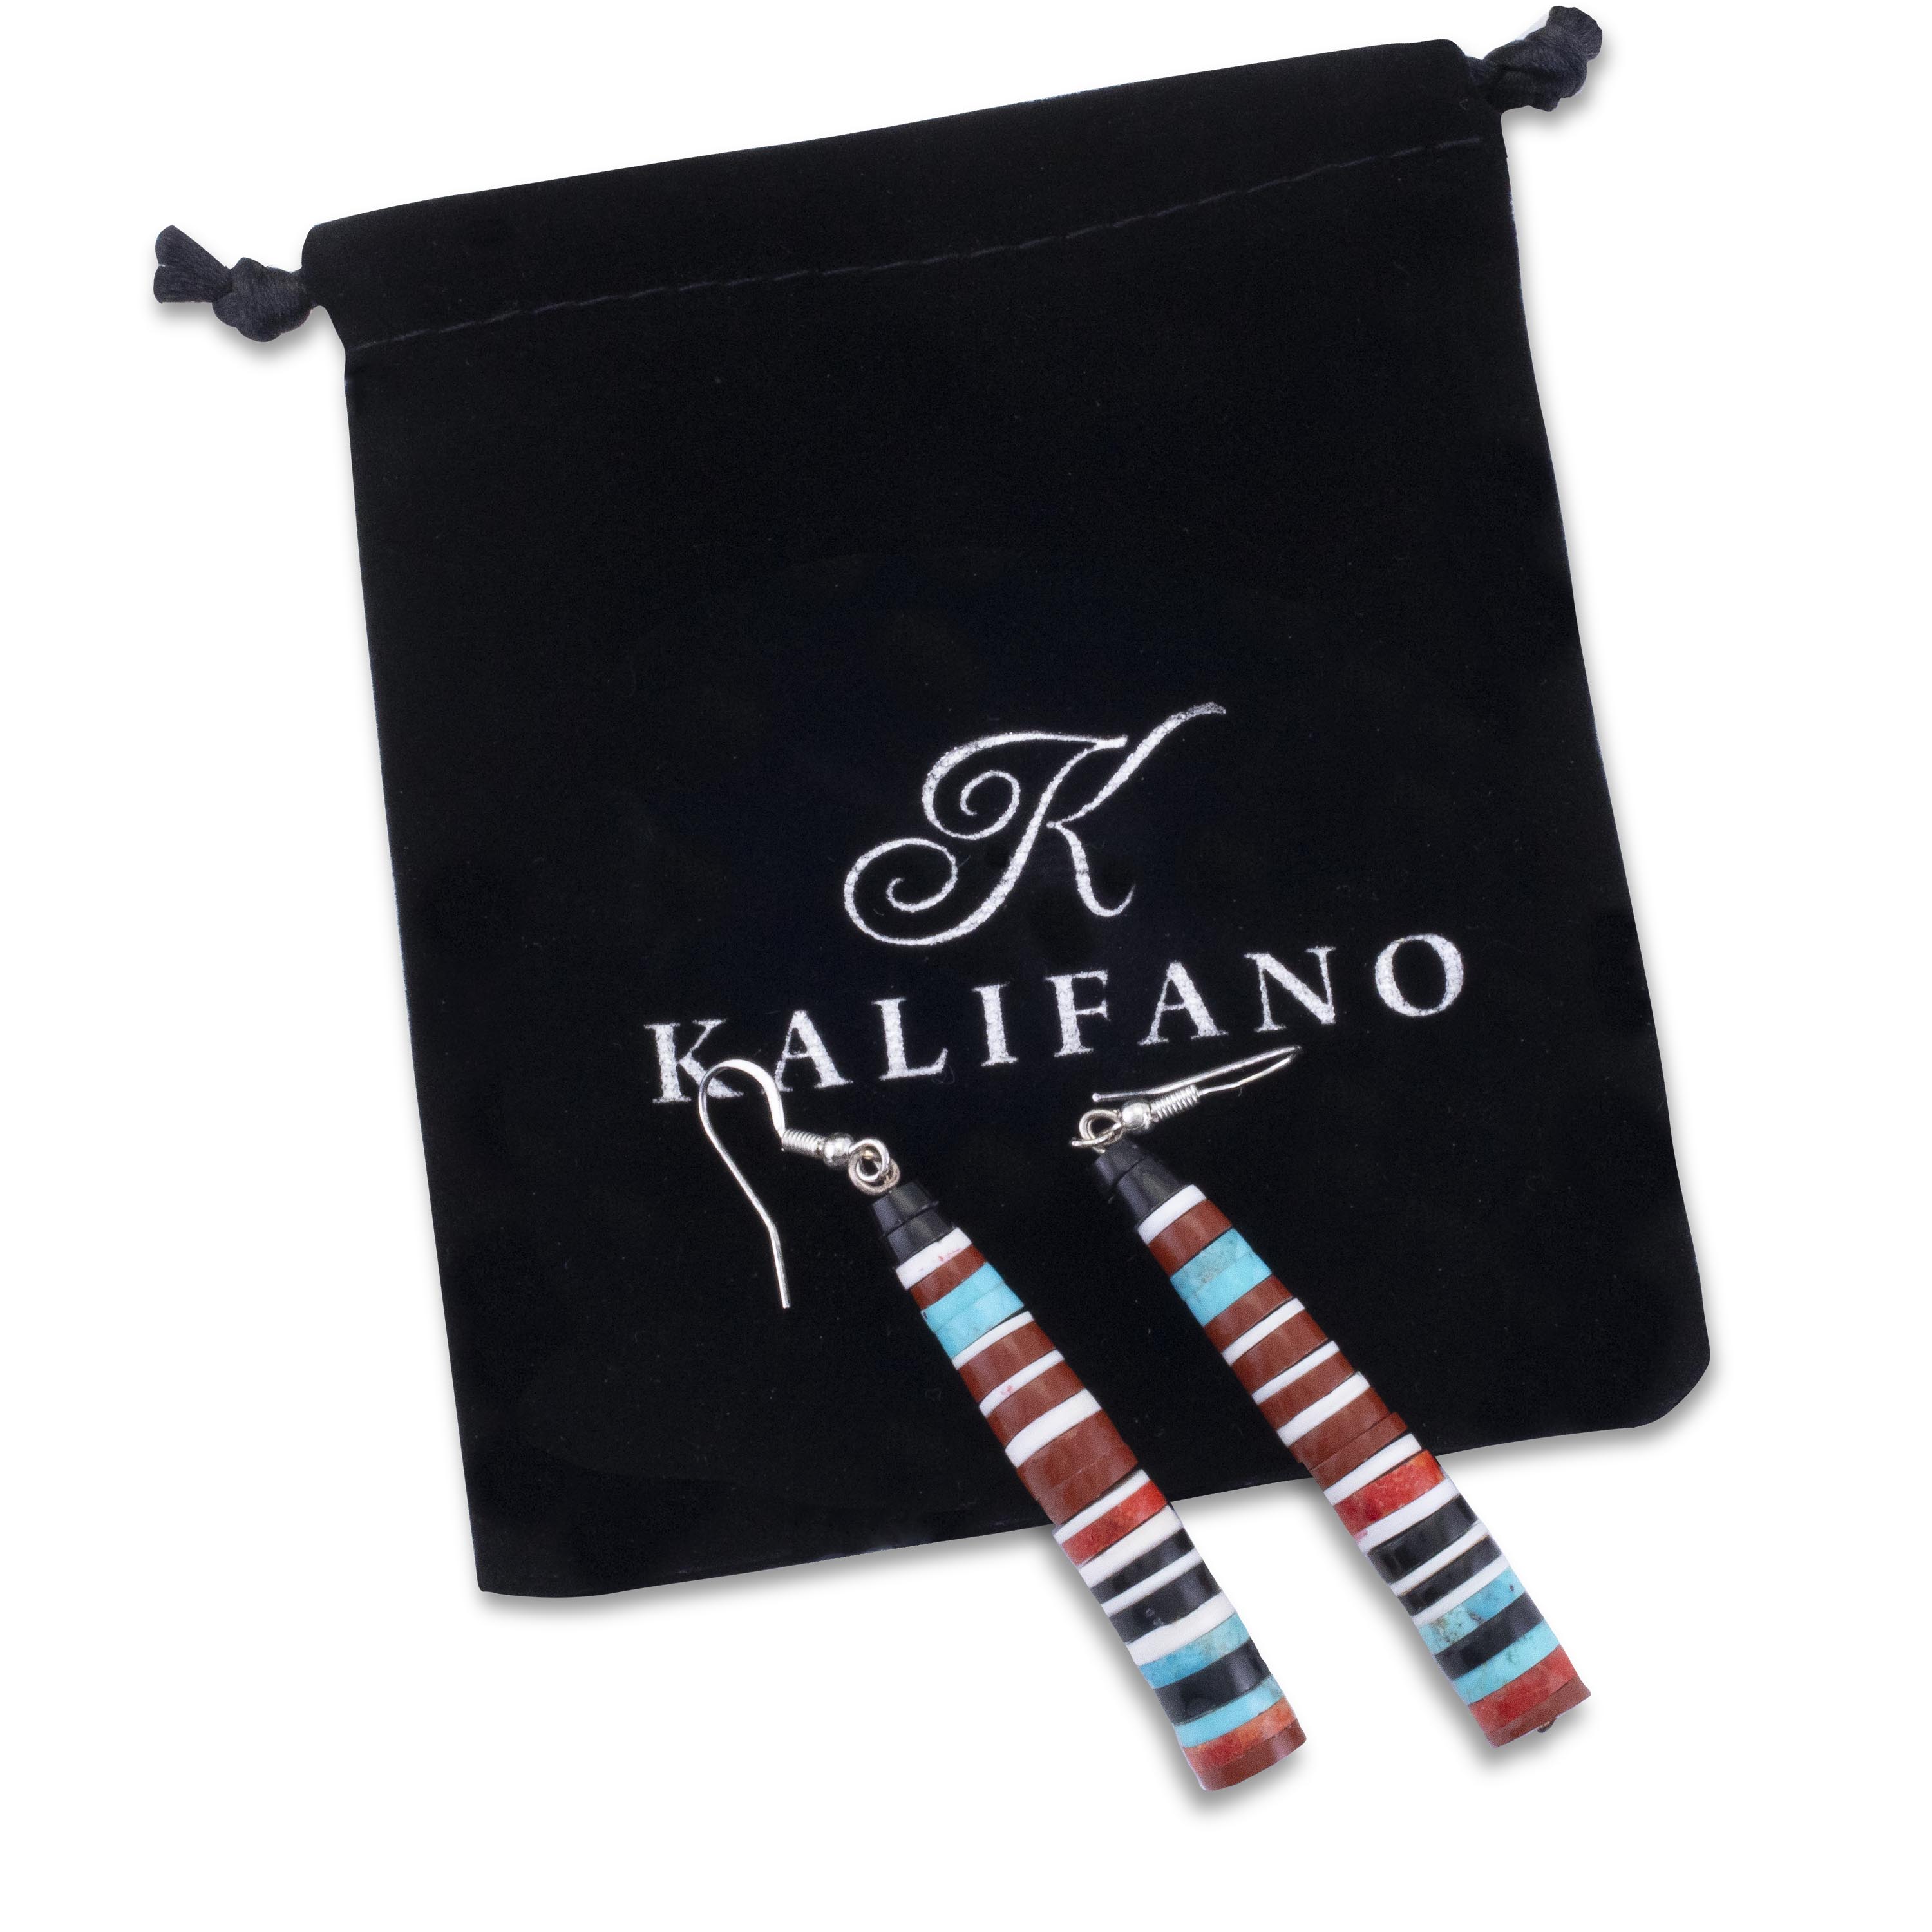 Kalifano Native American Jewelry Pula Calabaza Santo Domingo Heishi Turquoise, Jet, Howlite, Coral and Spiny Oyster Shell USA Native American Made 925 Sterling Silver Dangly Earrings NAE400.025